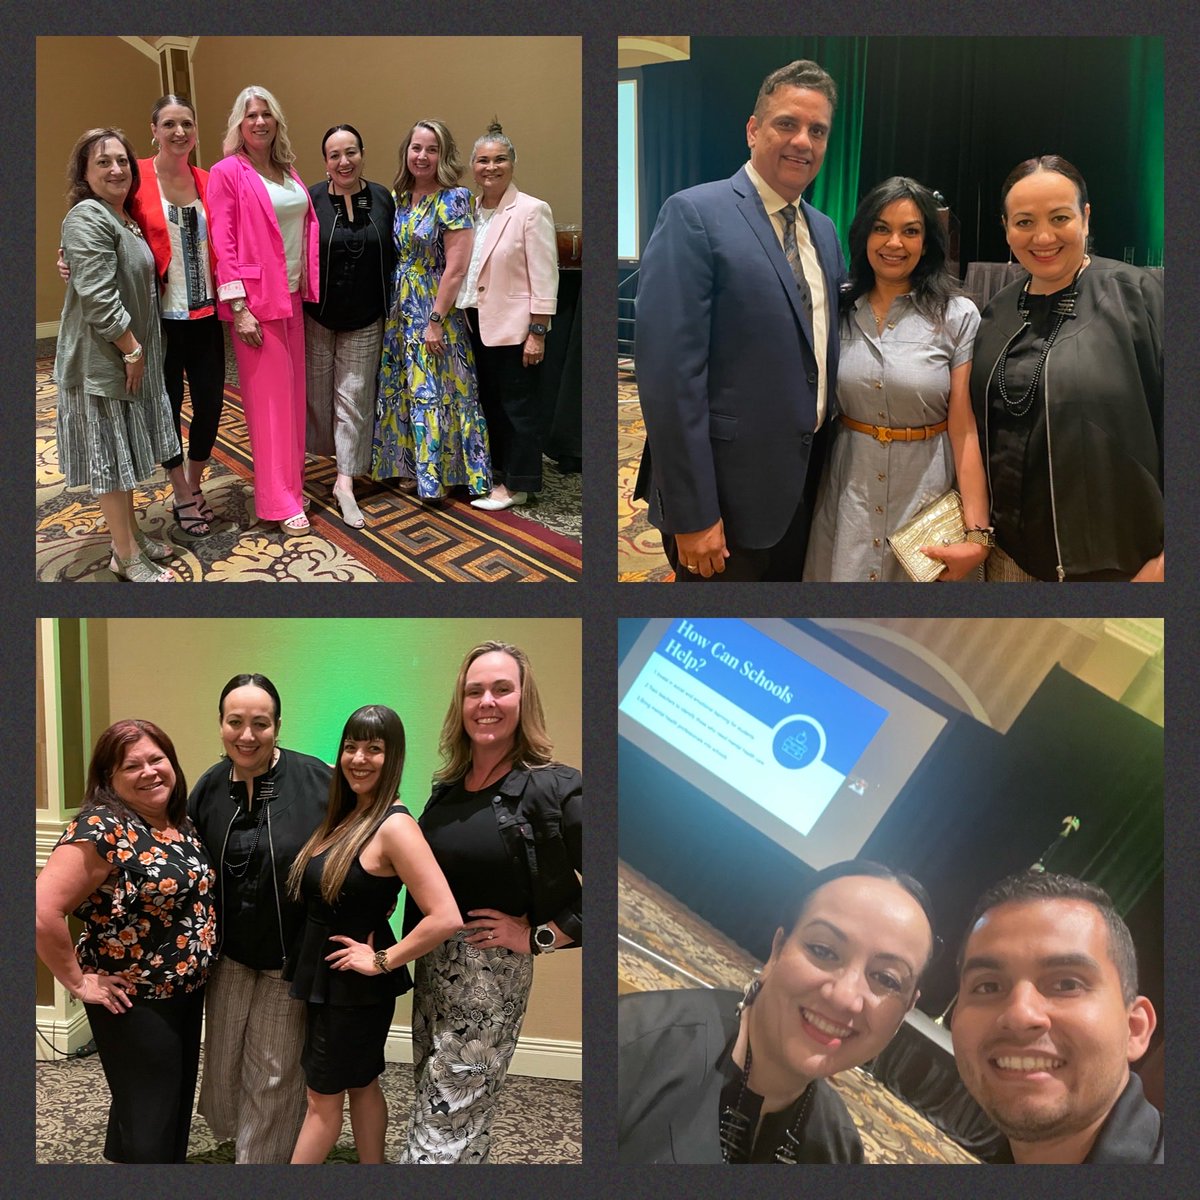 Congrats @AshMirch @UCFNV Inaugural 🏫 Based Mental Health Conference ~ Visionary Leaders “Providing Compassionate Care for the People & Communities We Serve” @unlvmedicine @MindfulSEAD @filicana 
#MentalHealthAwareness #MorethanEnough #BecauseLeadershipMatters